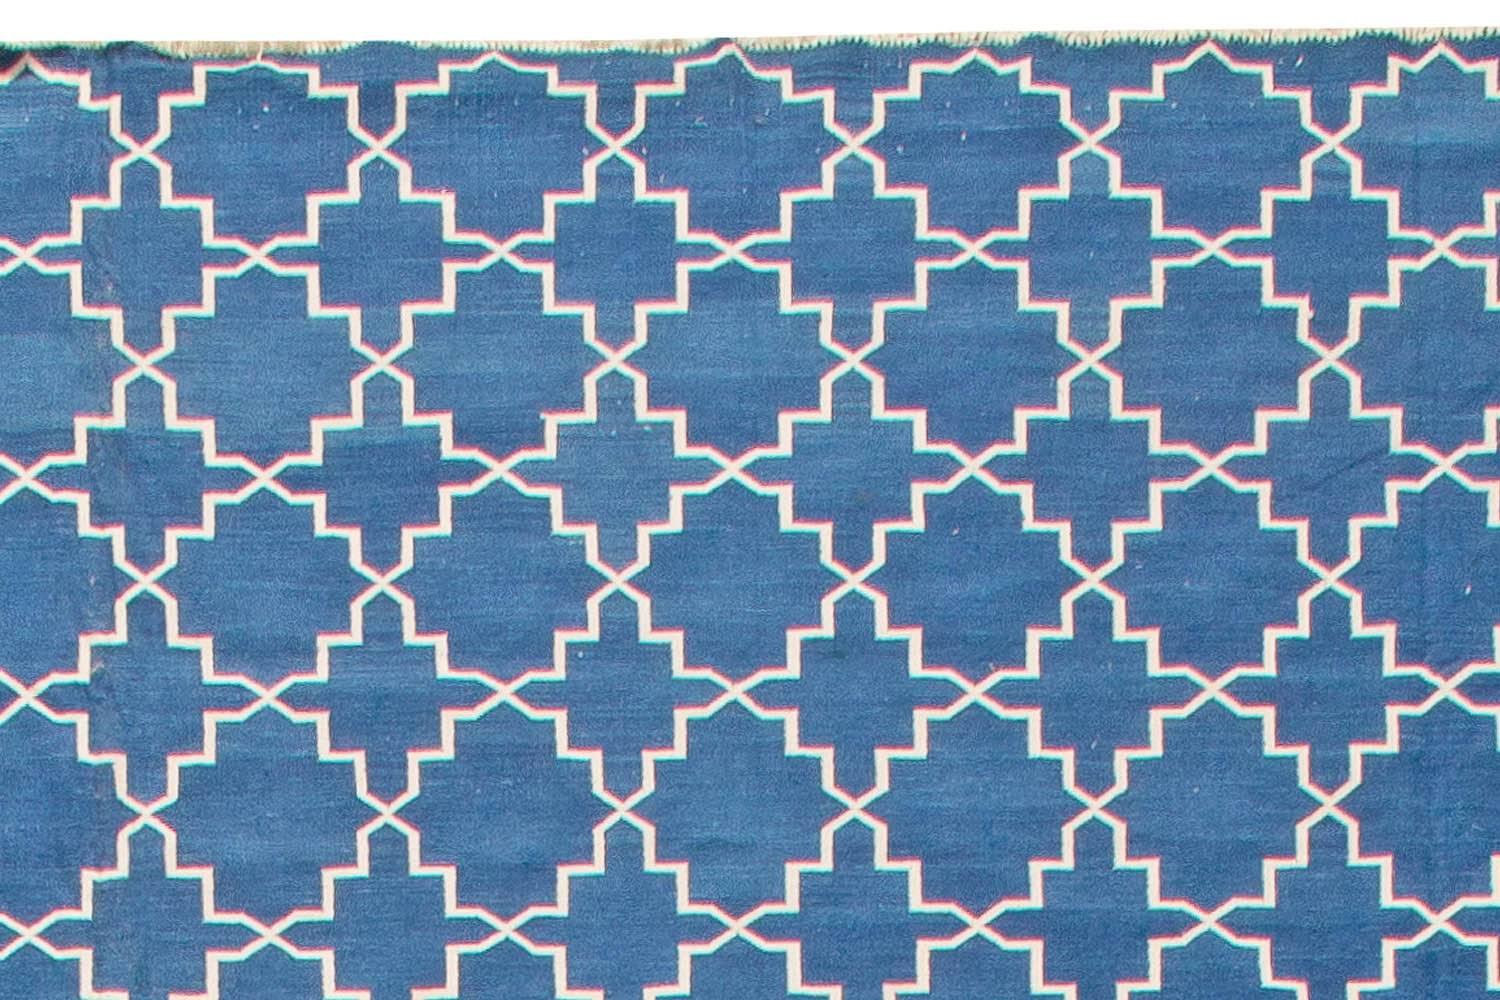 Cotton Contemporary Indian Dhurrie Blue and White Handmade Rug by Doris Leslie Blau For Sale